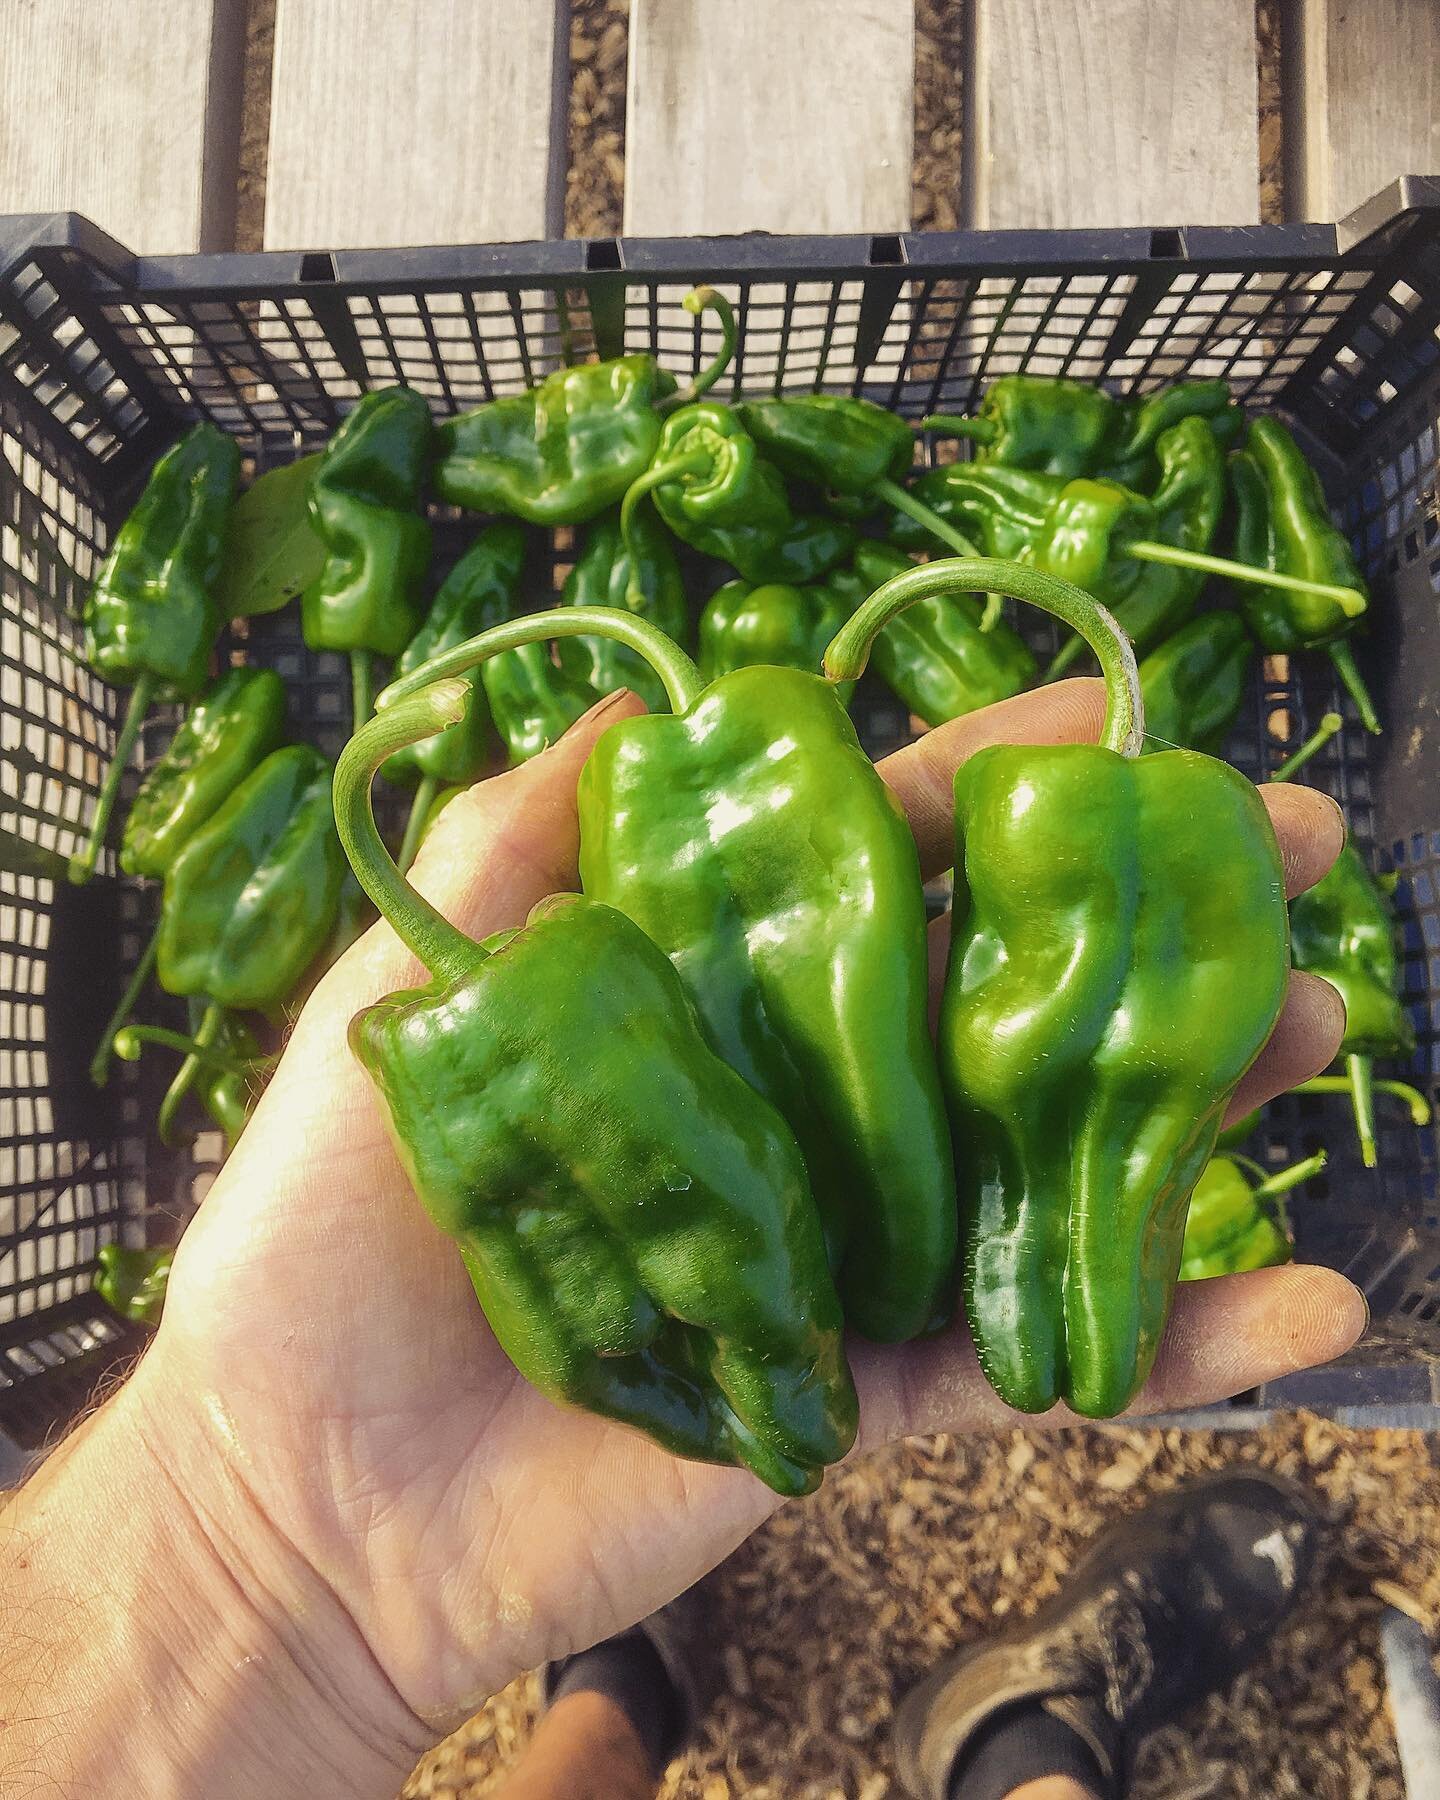 Padron Pepper Harvest! We popped these guys in the tunnel this year, not expecting much and got a great little result! Not the biggest harvest in the world (4/5 peppers per plant) but nice and healthy! #swansea #padronpeppers